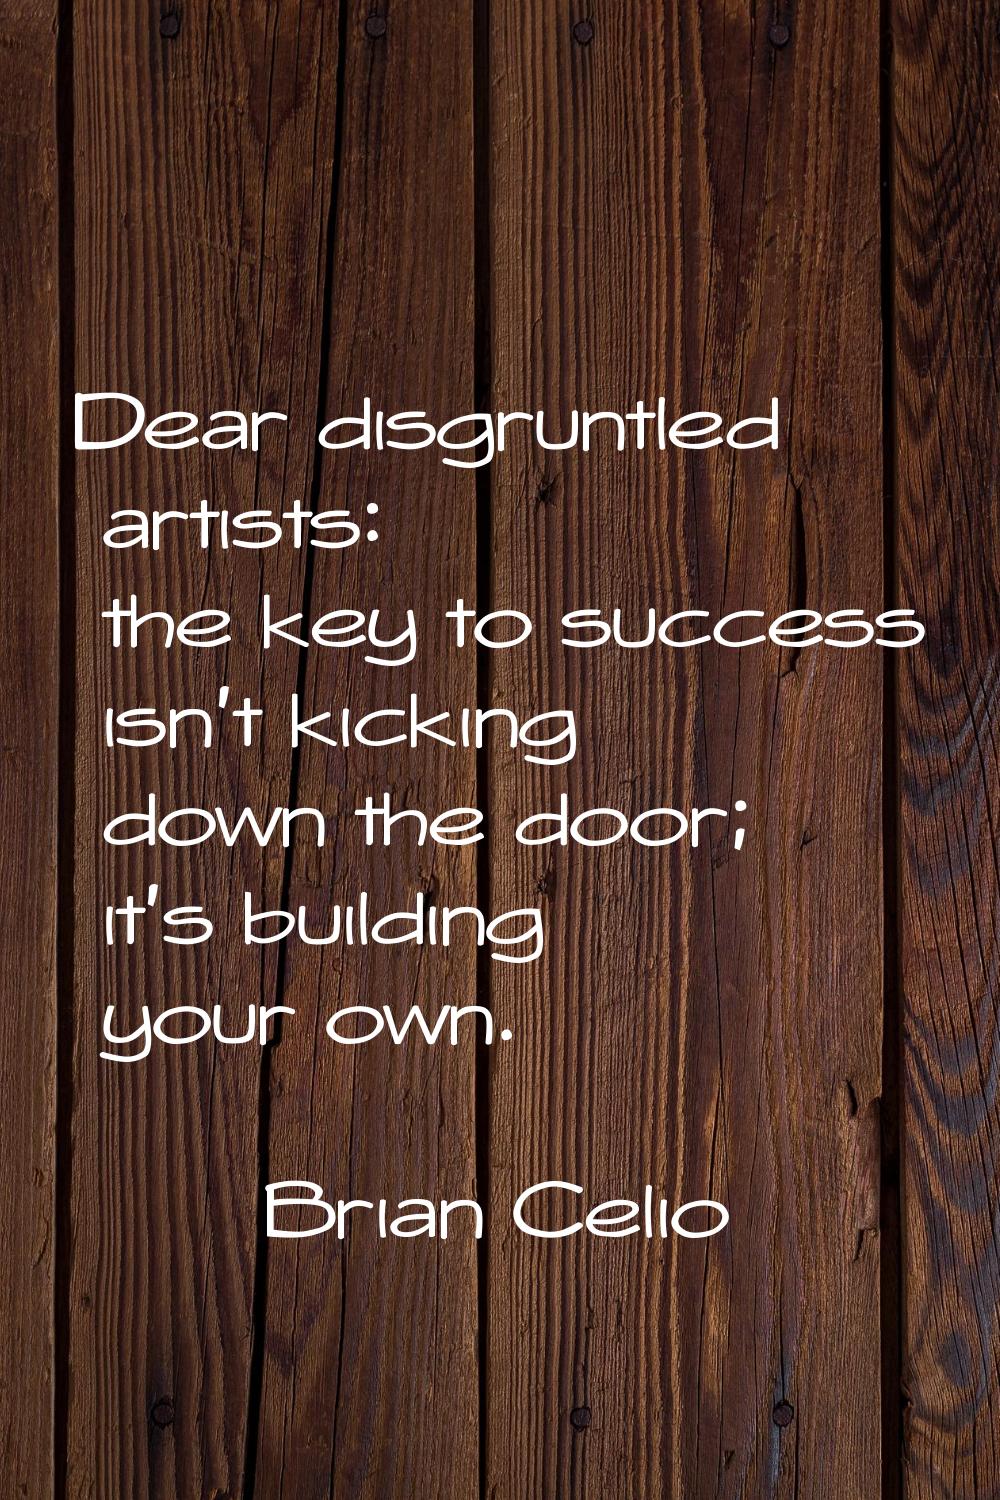 Dear disgruntled artists: the key to success isn't kicking down the door; it's building your own.